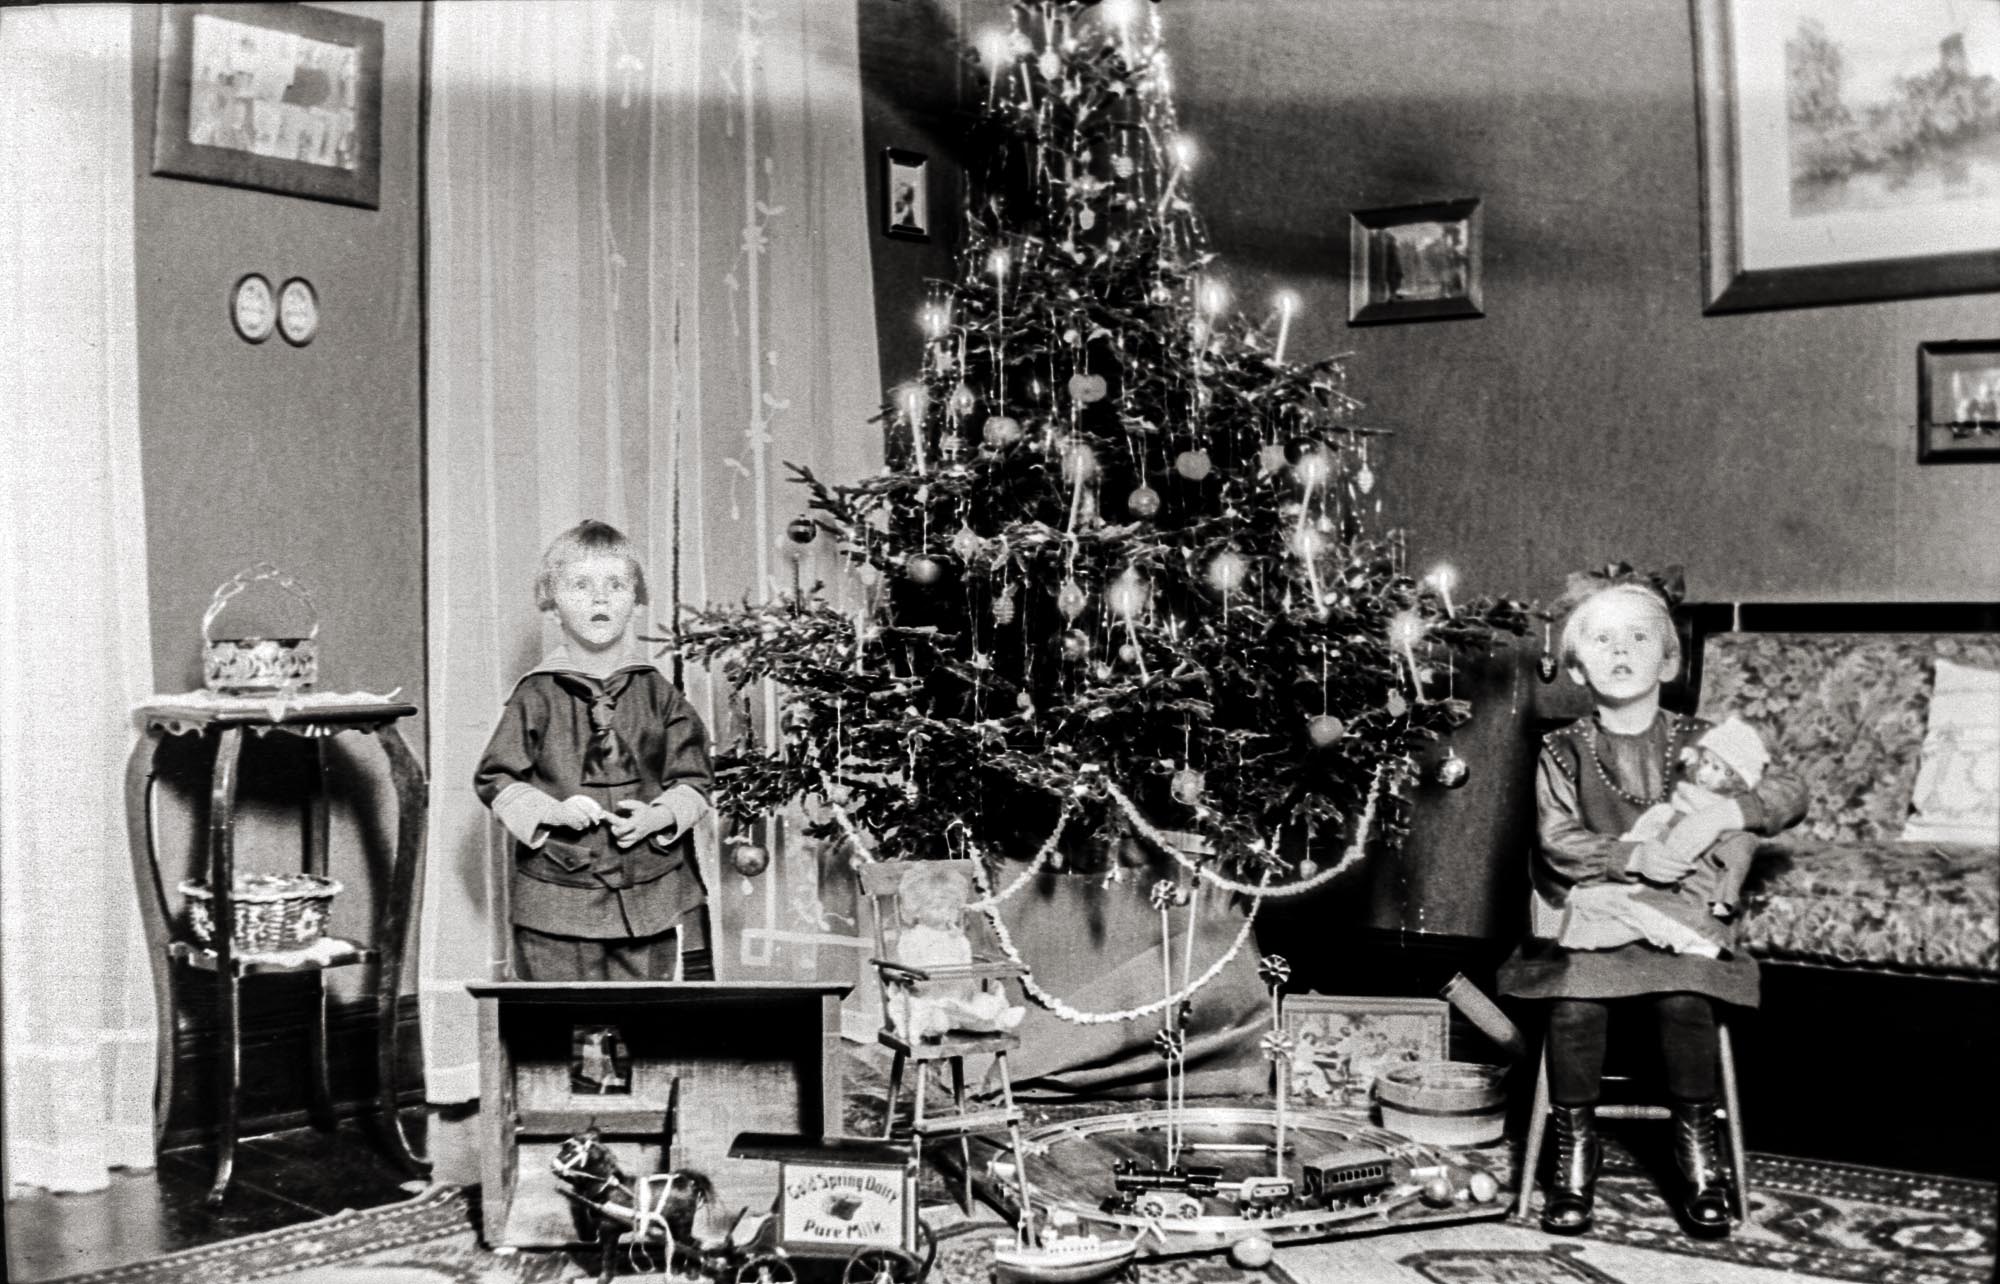 Christmas in Buffalo, NY. 1917. The year is a guesstimate based on the birth dates of Hermann (1912, on the left) and Johanna (1911).  They are enjoying their new toys under the tree lit with actual candles.

In additional to the traditional train by the tree I find most fascinating the horse-drawn milk delivery wagon.  This image doesn't show it well but the horse is mounted on a wheeled platform for smoother playtime.

This image was digitized from a 4x5 glass negative.